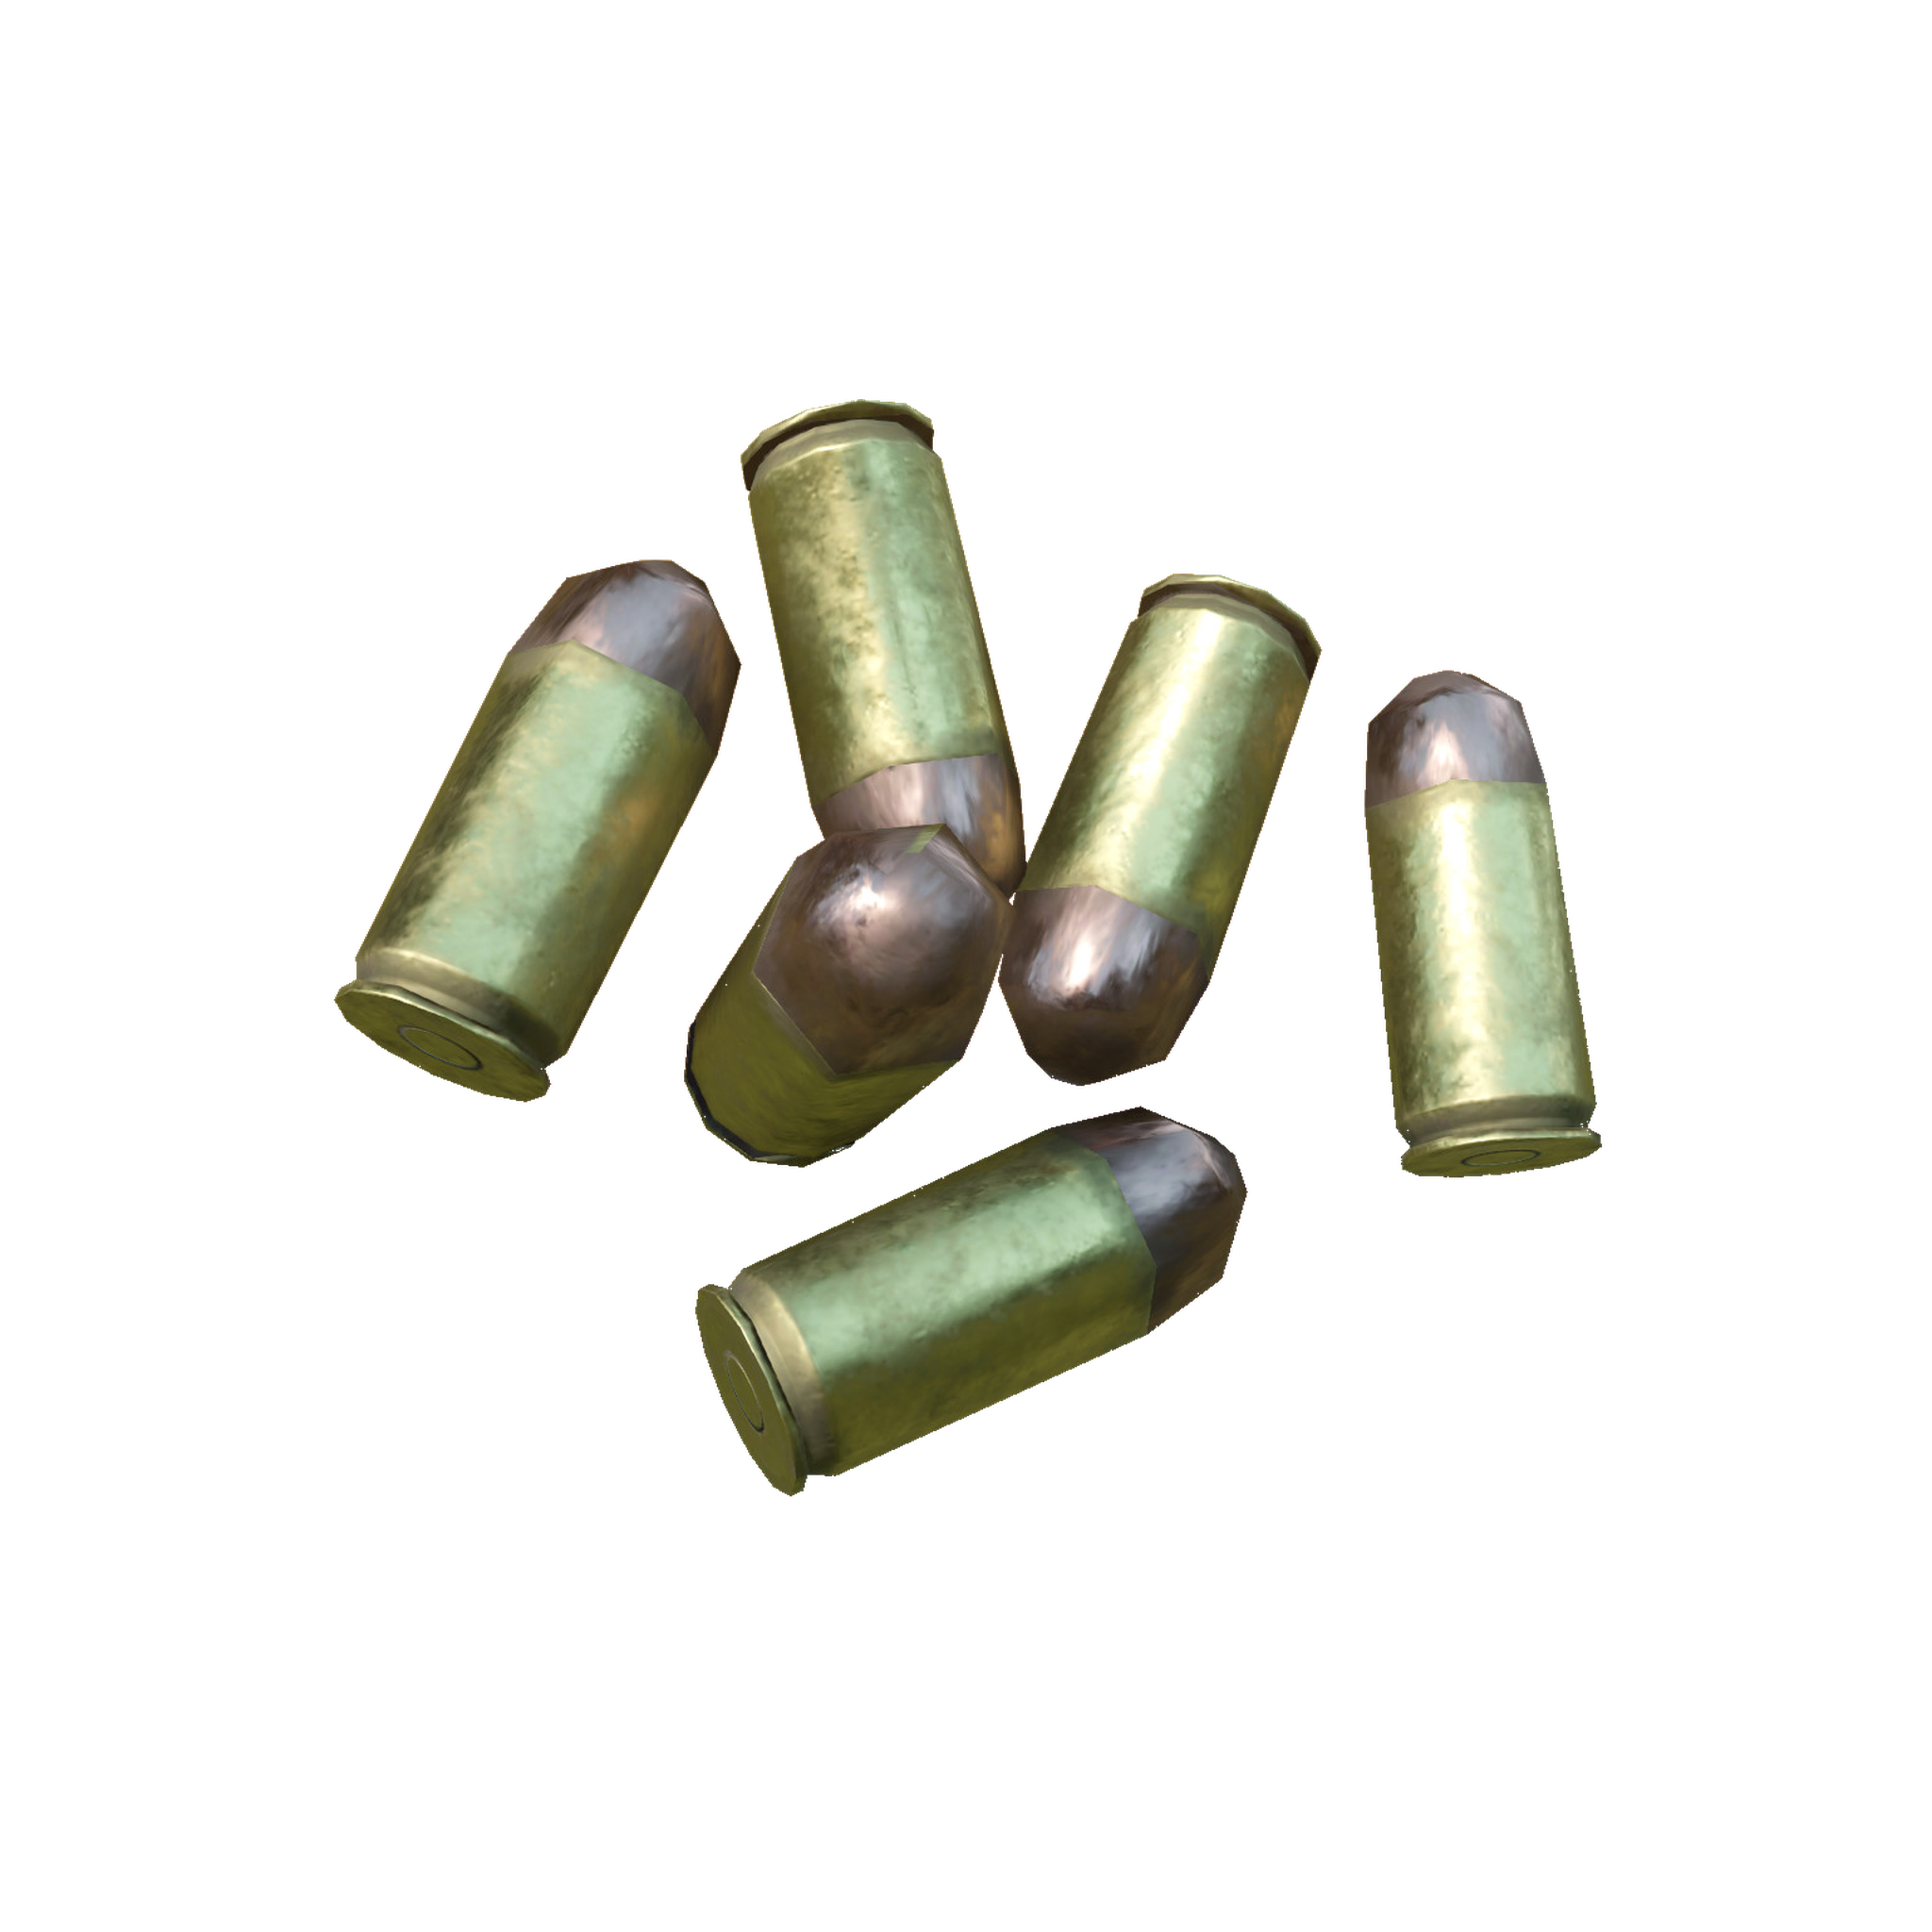 https://static.wikia.nocookie.net/miscreated/images/e/eb/Pile_45ACP_2048.png/revision/latest?cb=20180807072543